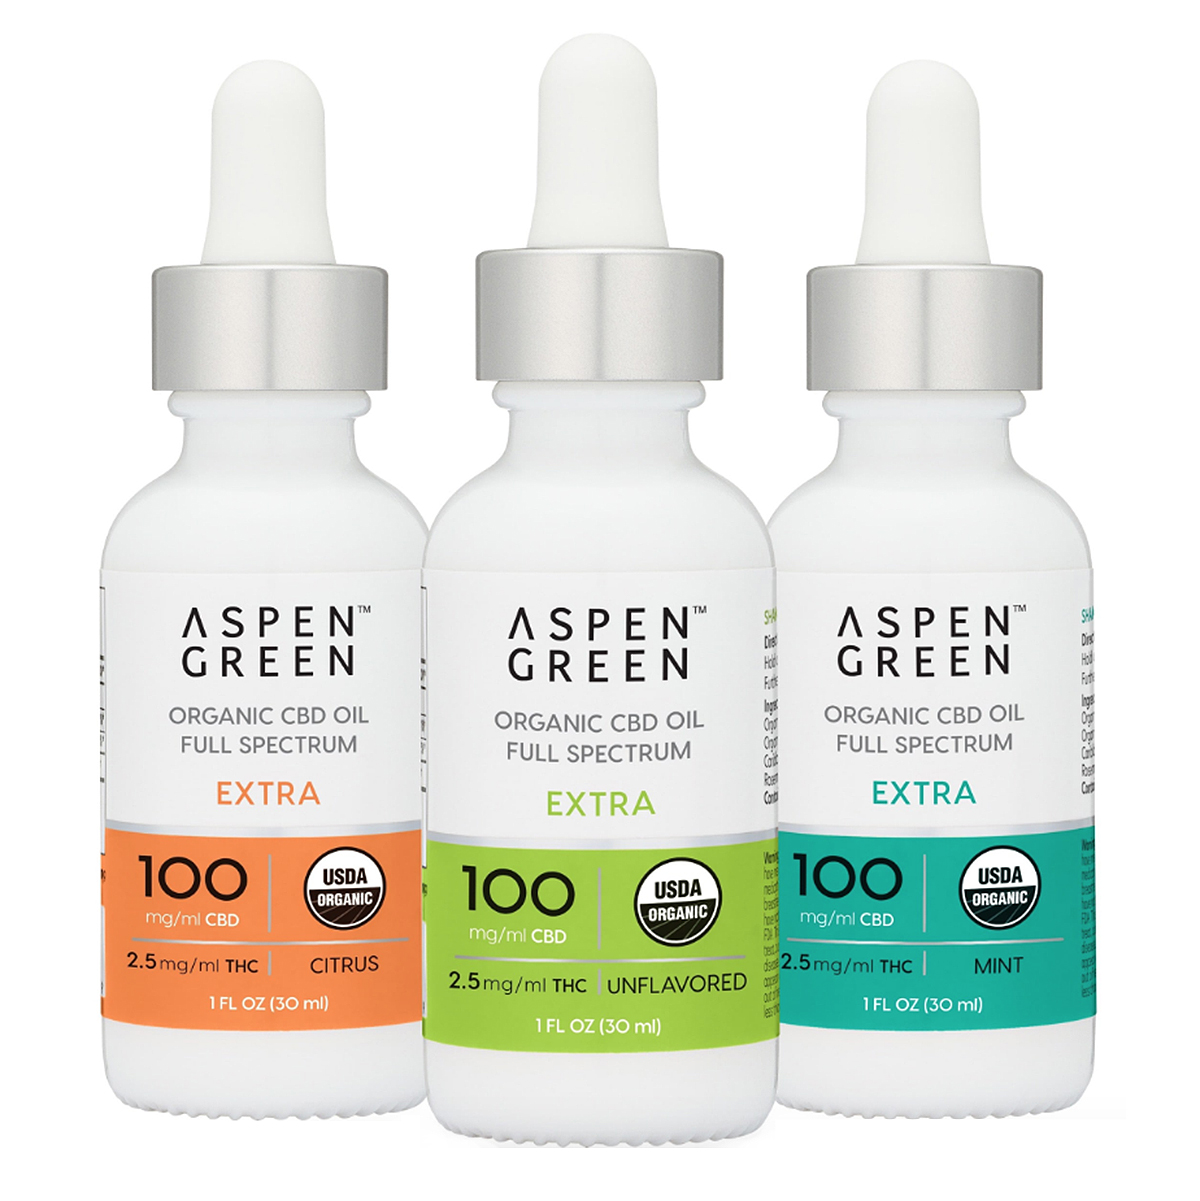 Aspen Green CBD Could Help With Sleep, Stress, Weight Loss and More thumbnail